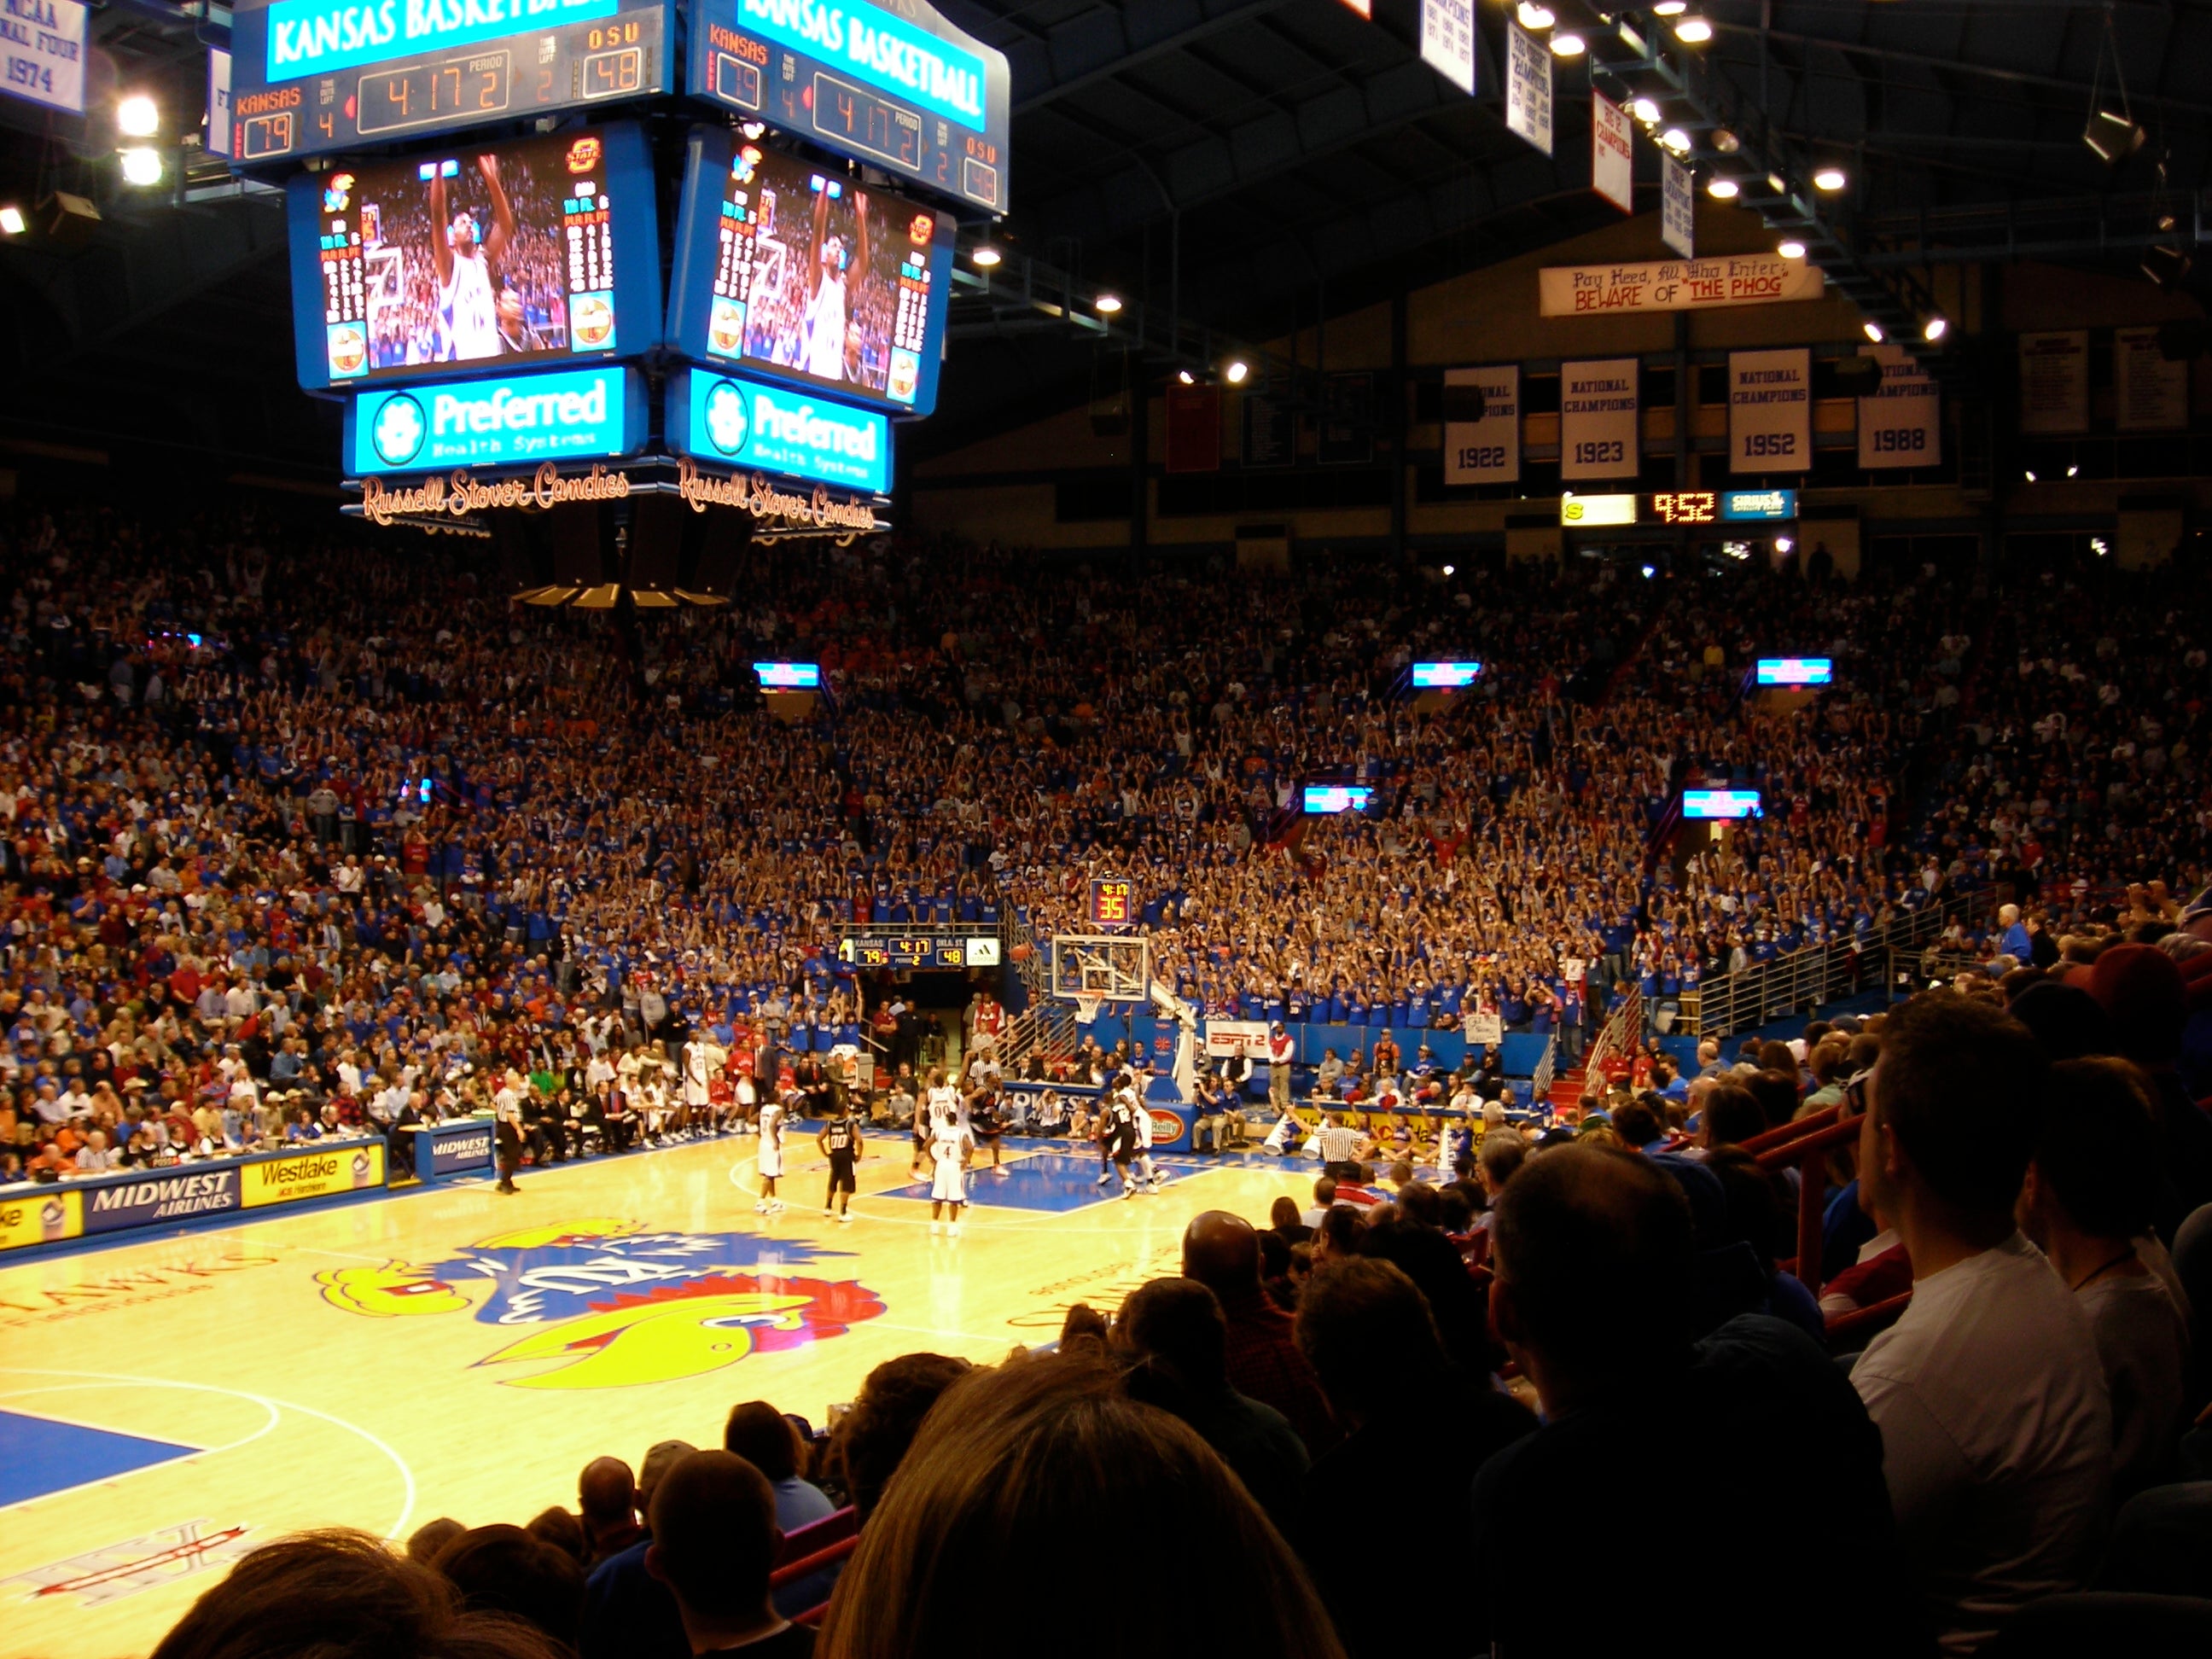 Allen Fieldhouse Seating Chart With Rows